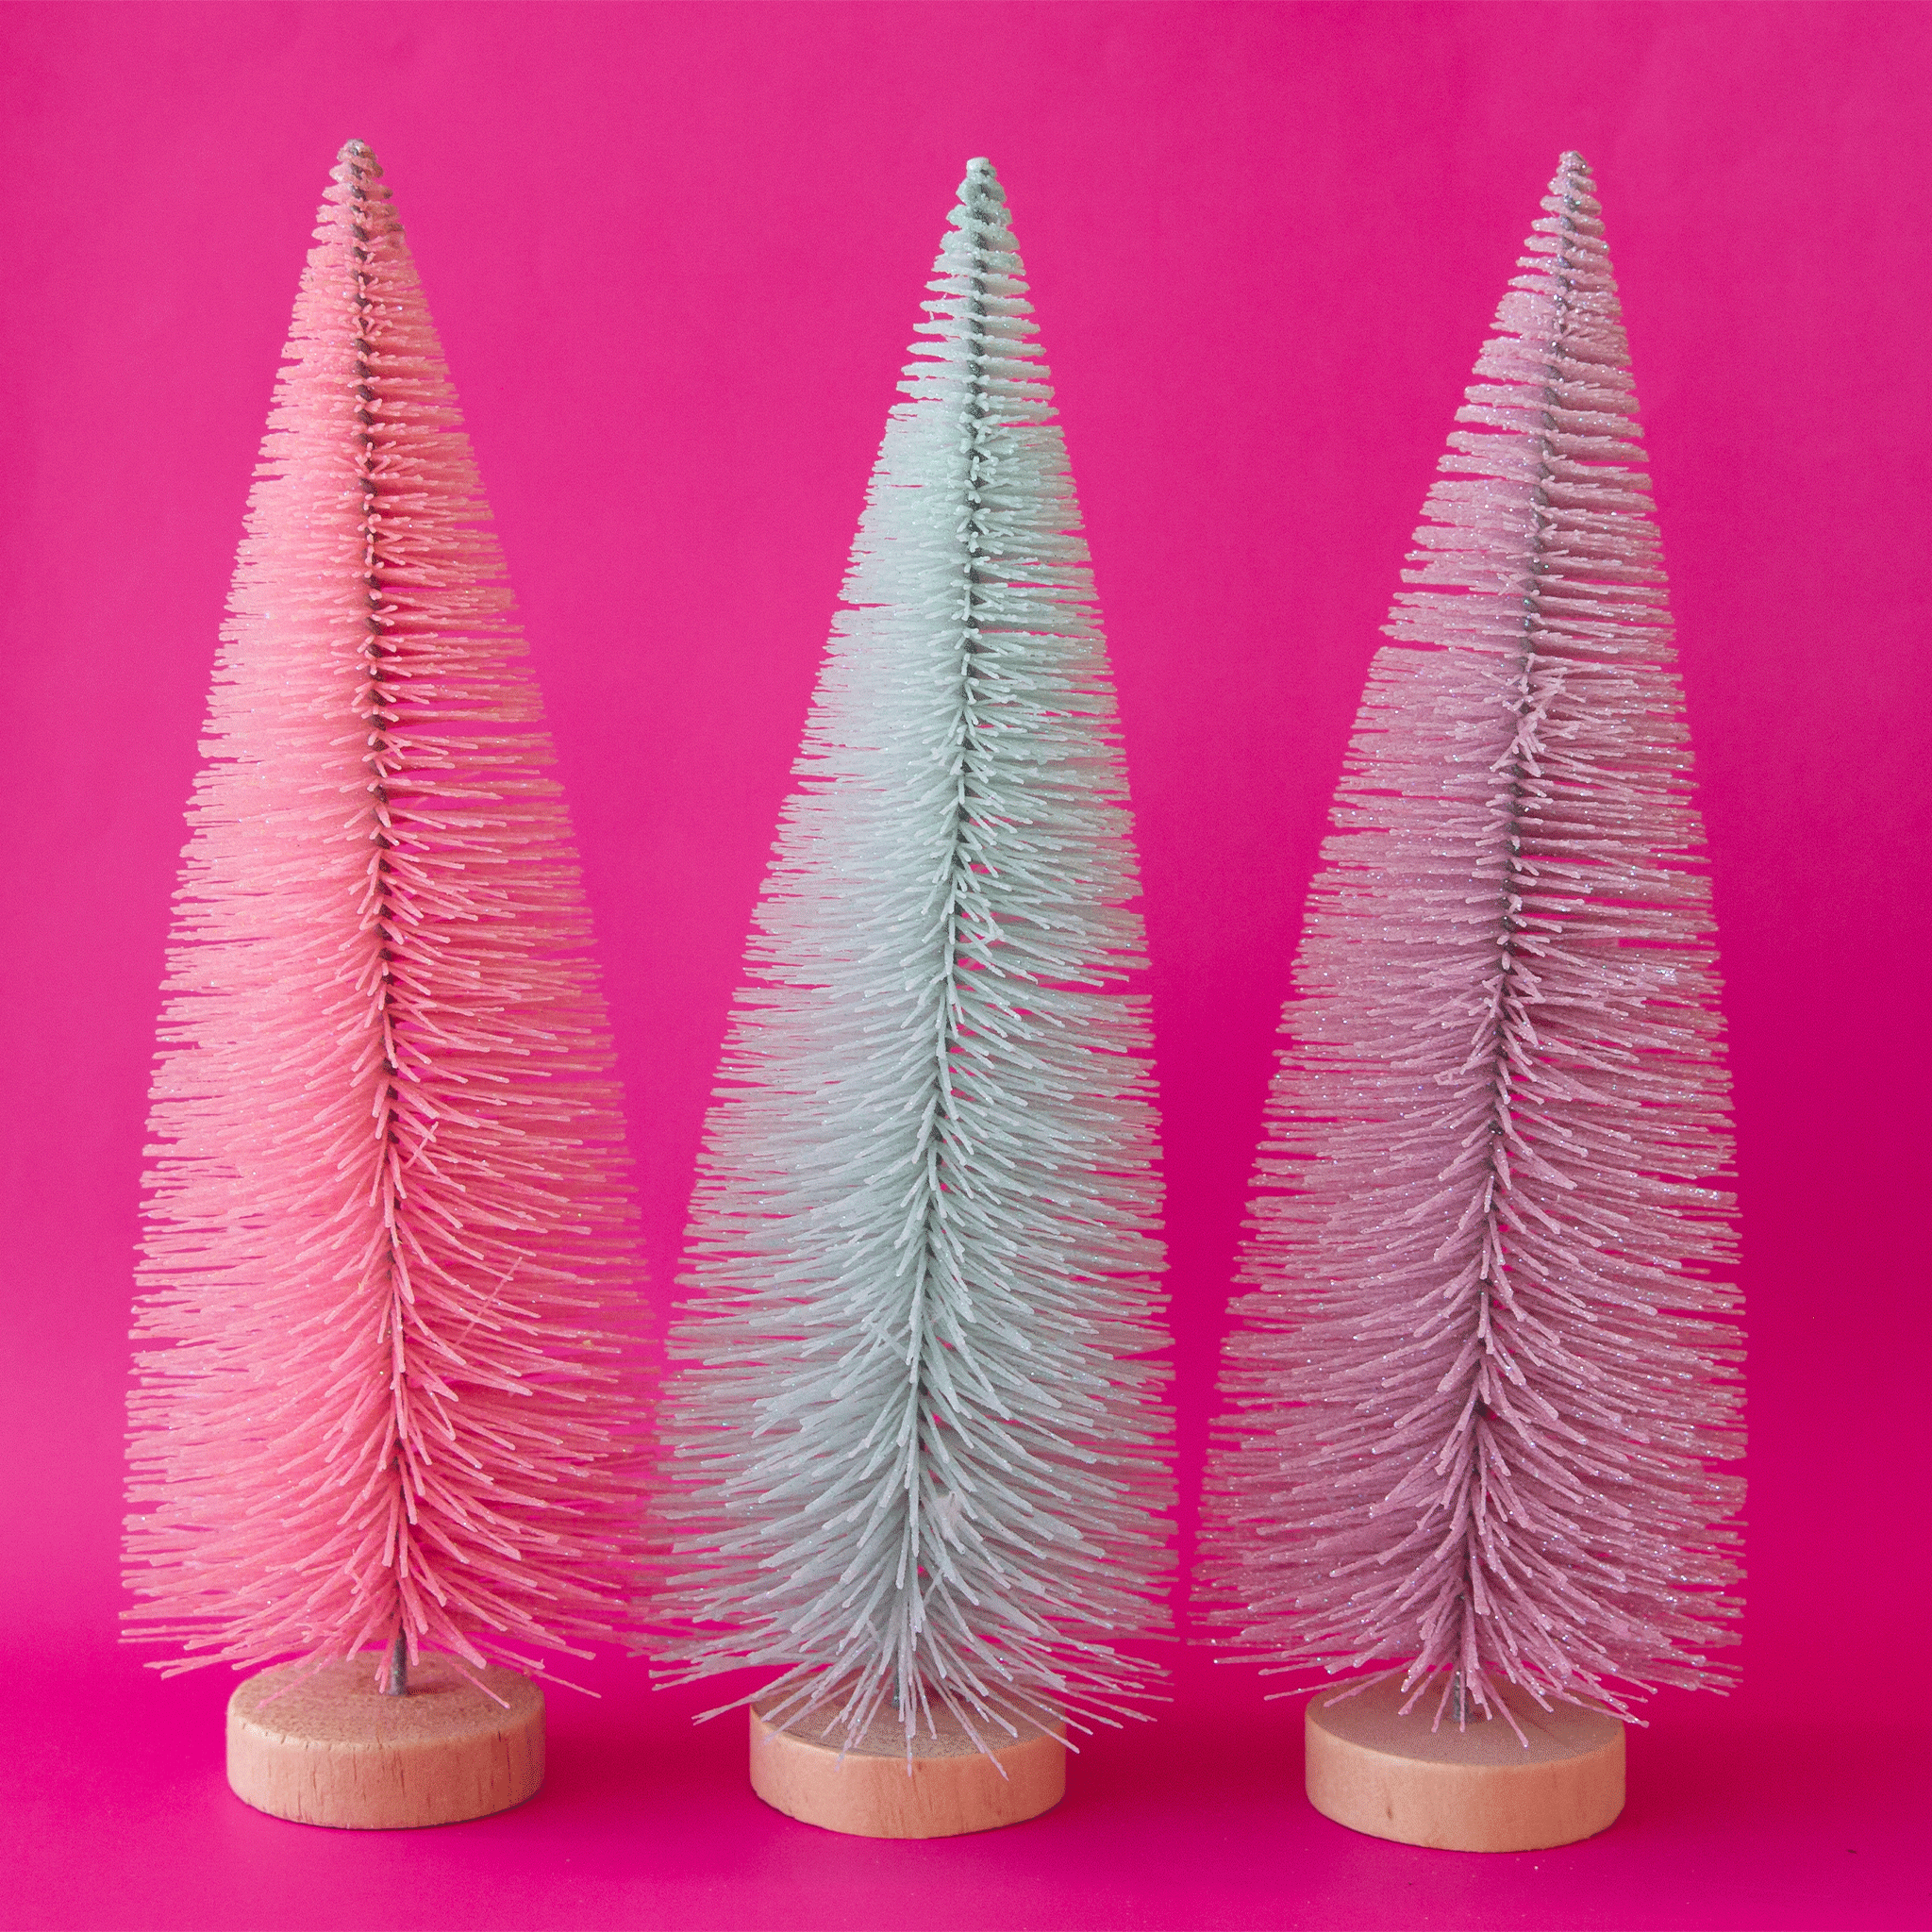 On a pink background is all three colors of the bottle brush trees.